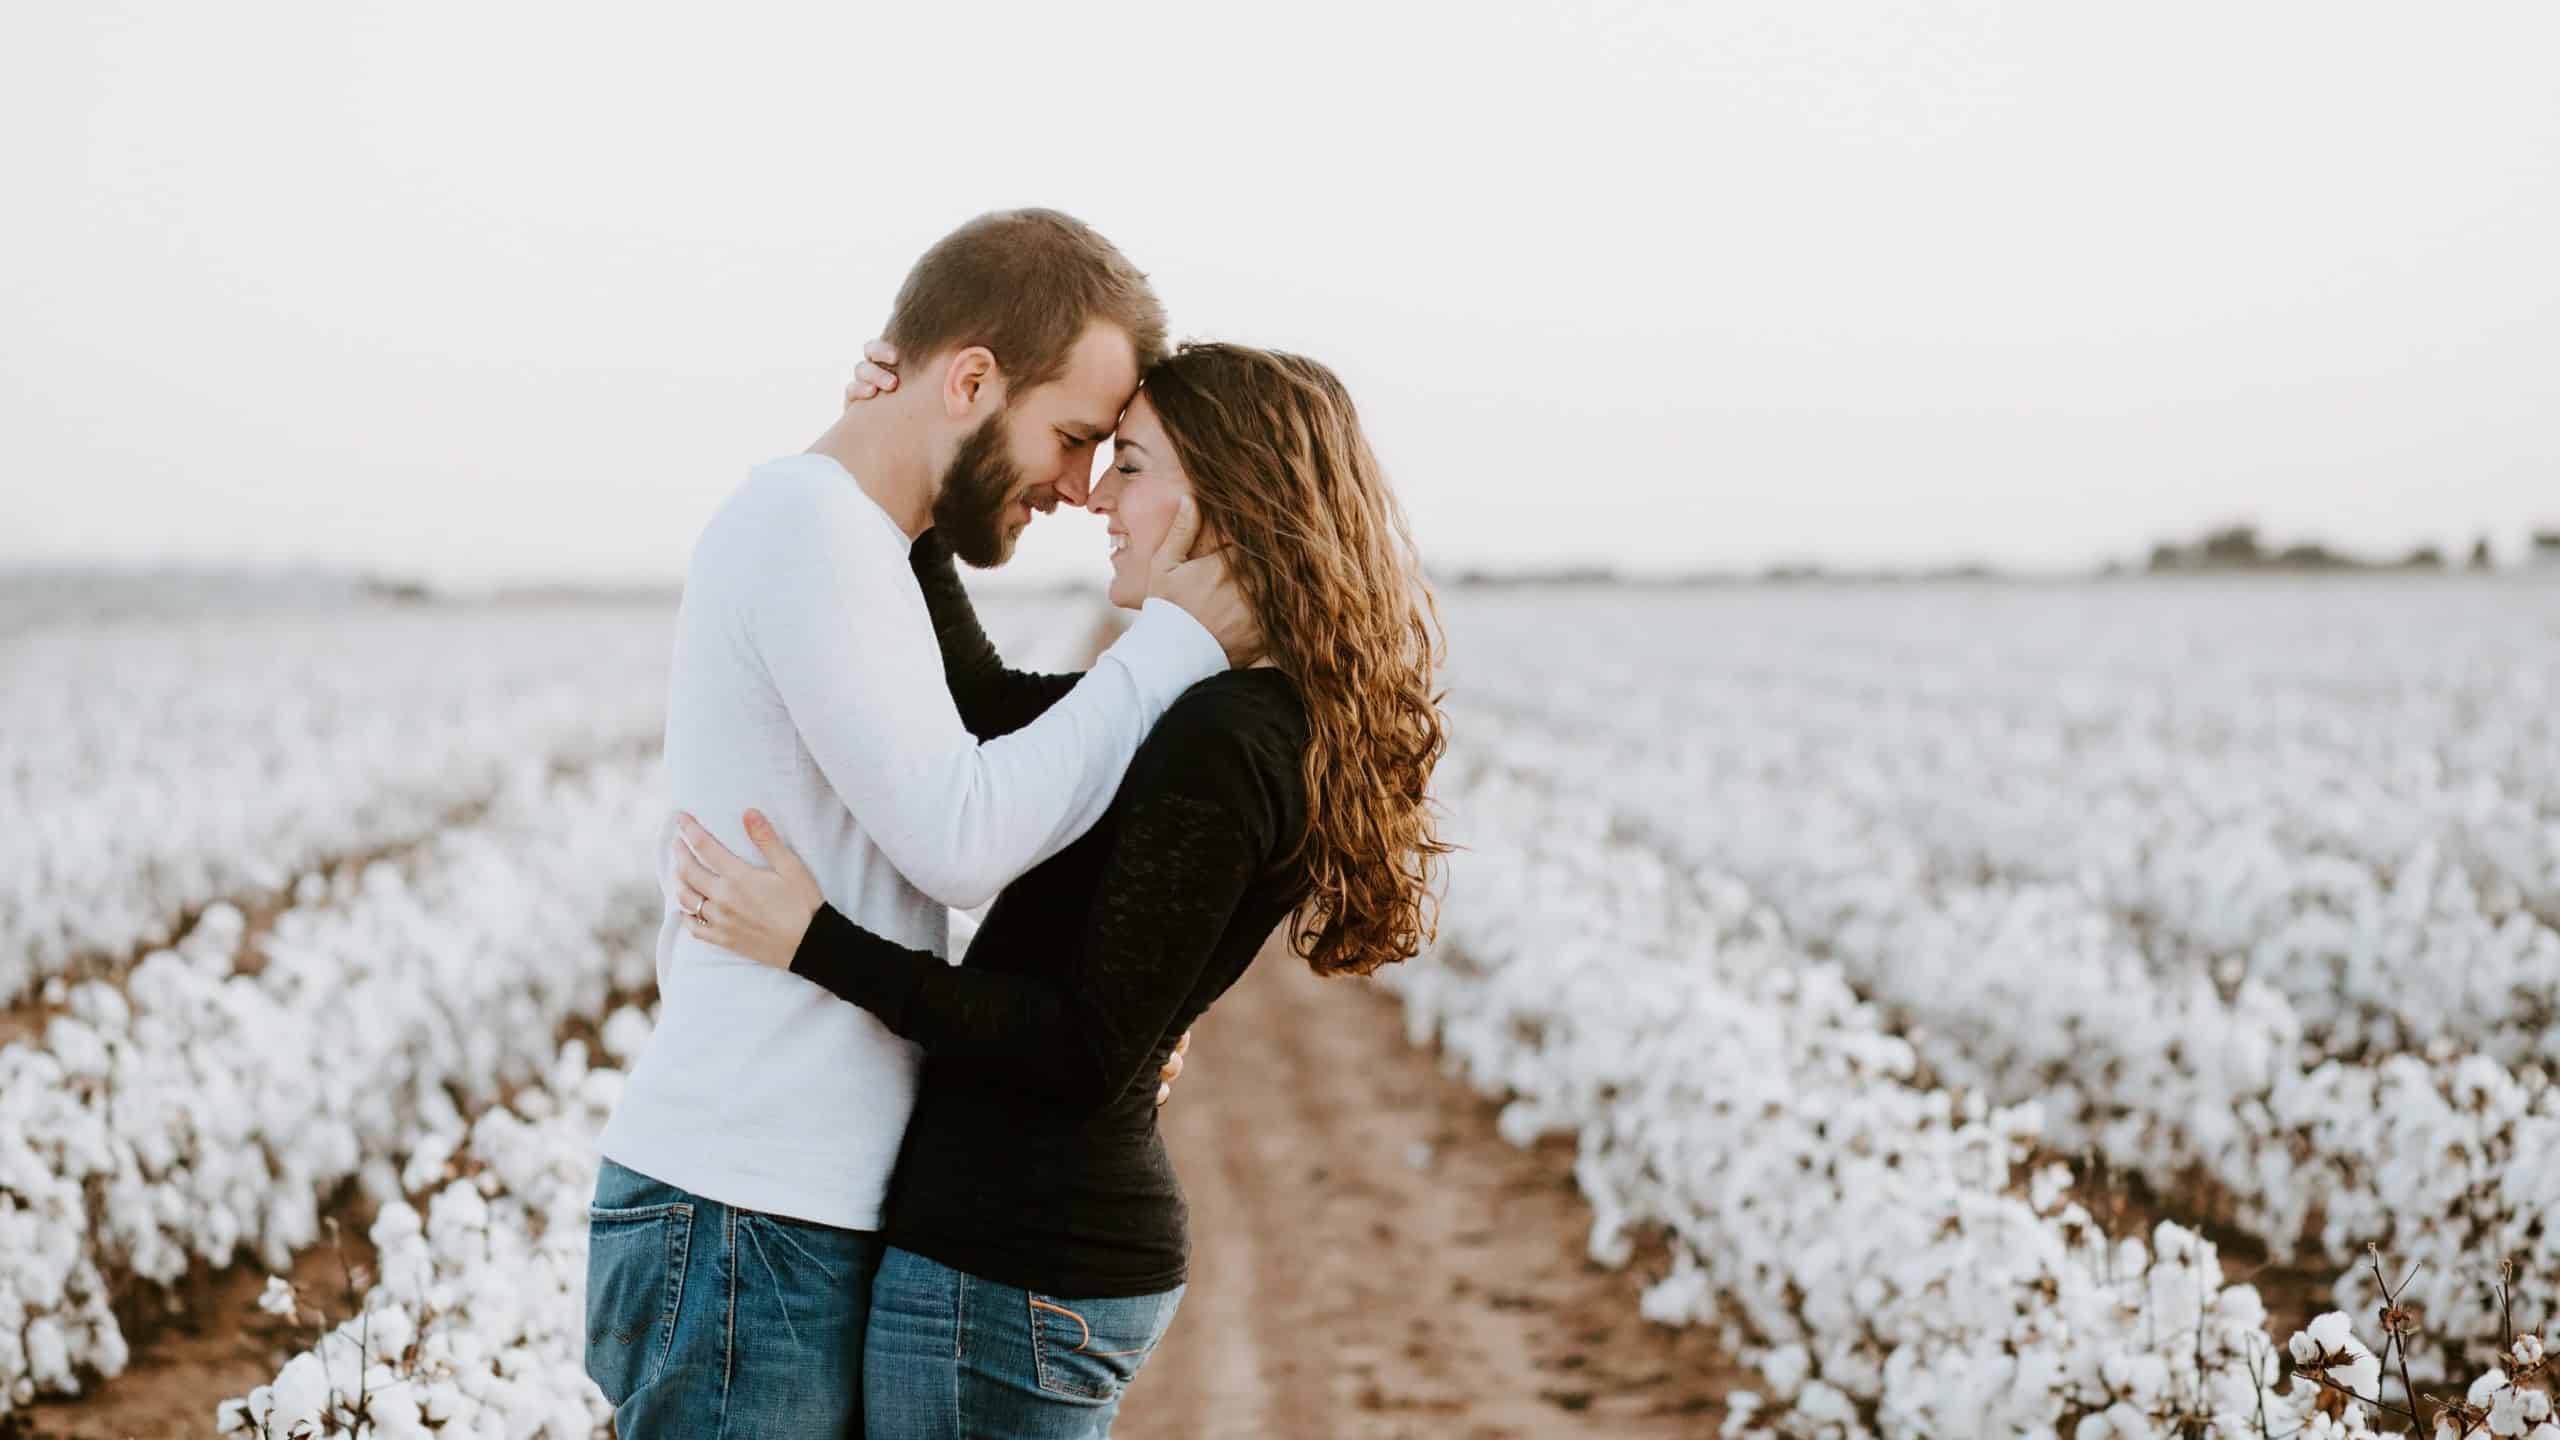 Engaged couple in field processing postponed wedding plans